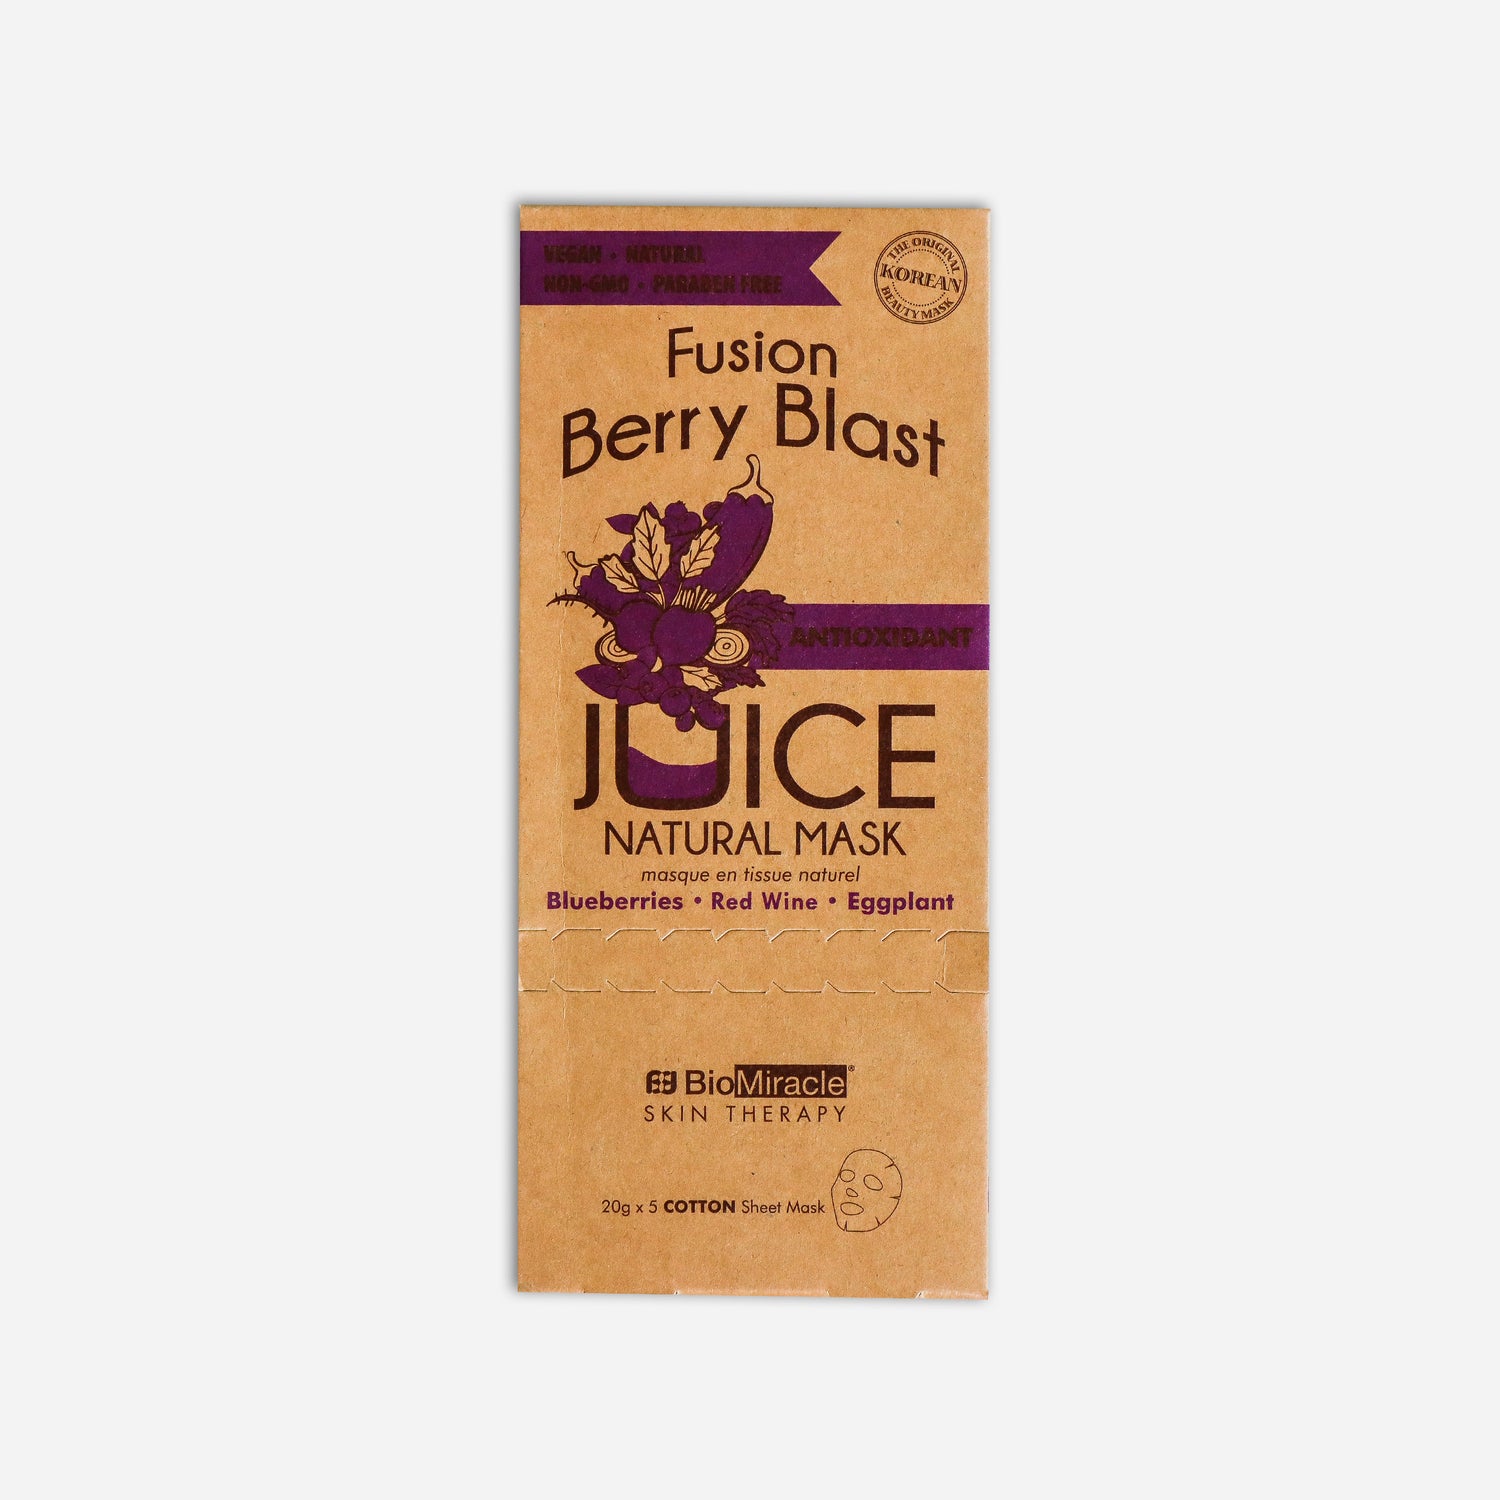 Fusion Berry Blast Antioxidant Juice Natural Mask 5 pack